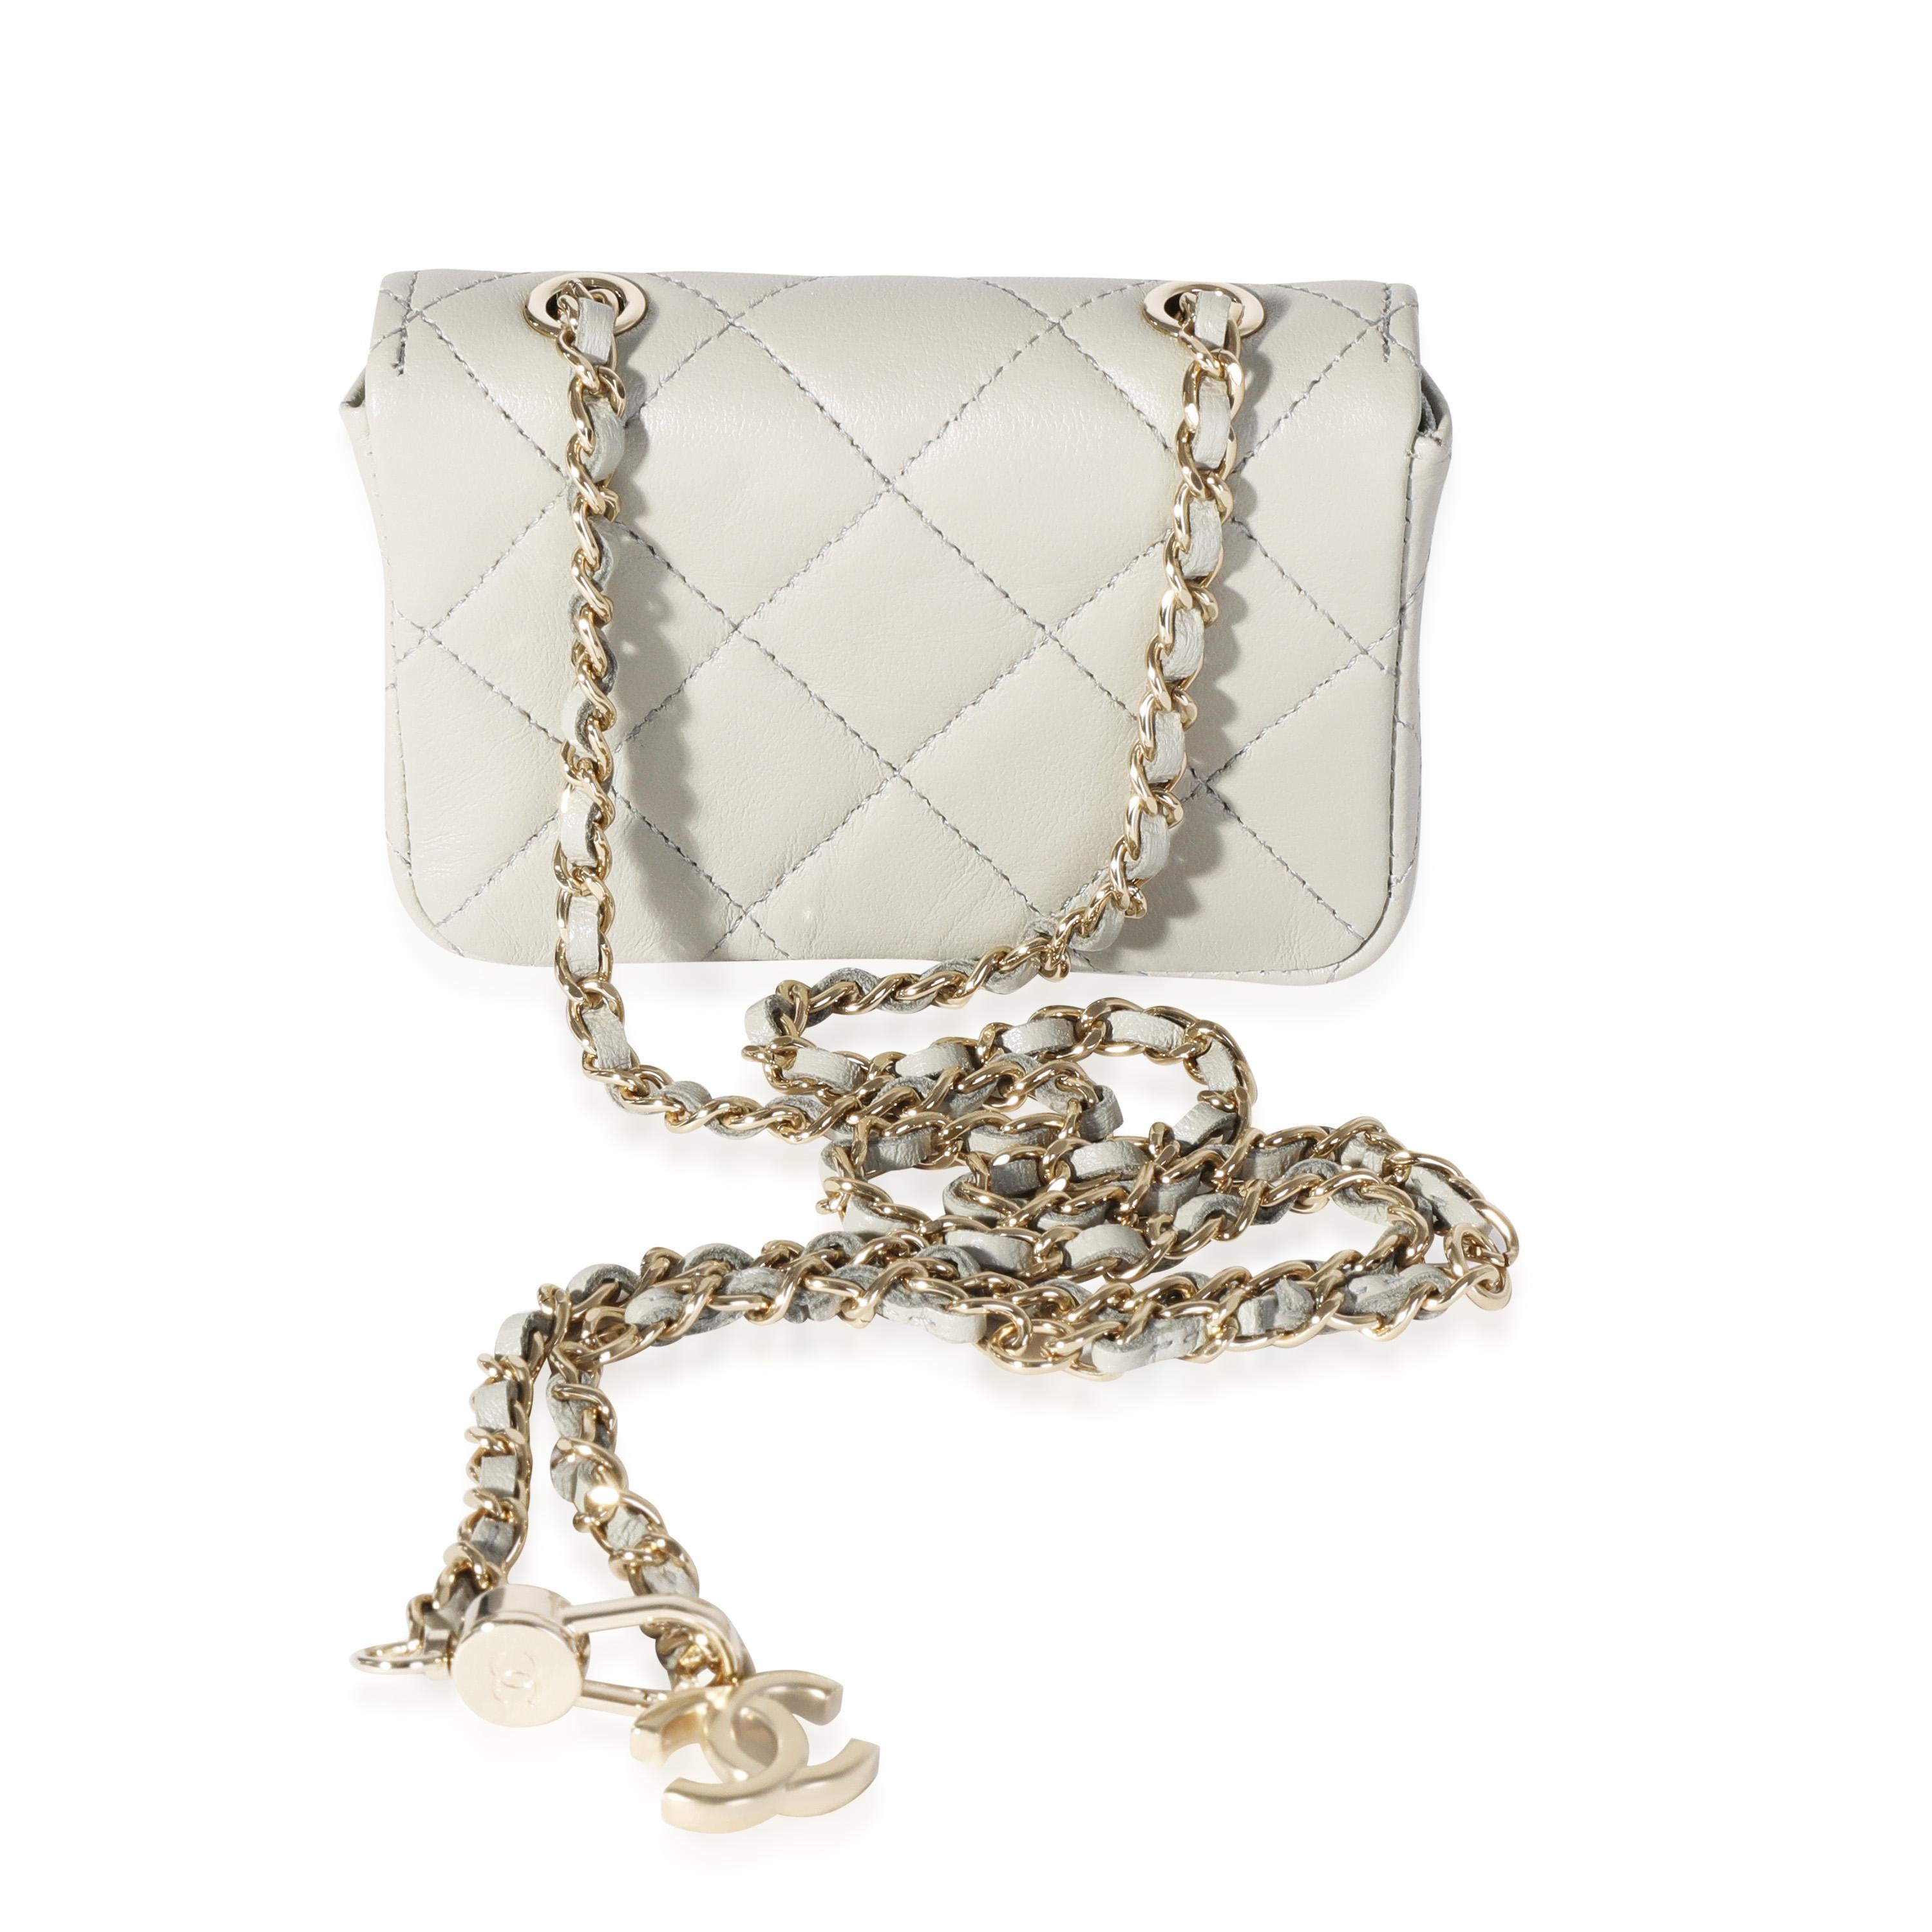 Listing Title: Chanel Grey Quilted Lambskin Mini Chain Belt Bag
SKU: 116652
Condition: Pre-owned (3000)
Handbag Condition: Never Worn
Brand: Chanel
Model: Grey Quilted Lambskin Chain Belt Bag
Origin Country: France
Handbag Silhouette: Belt